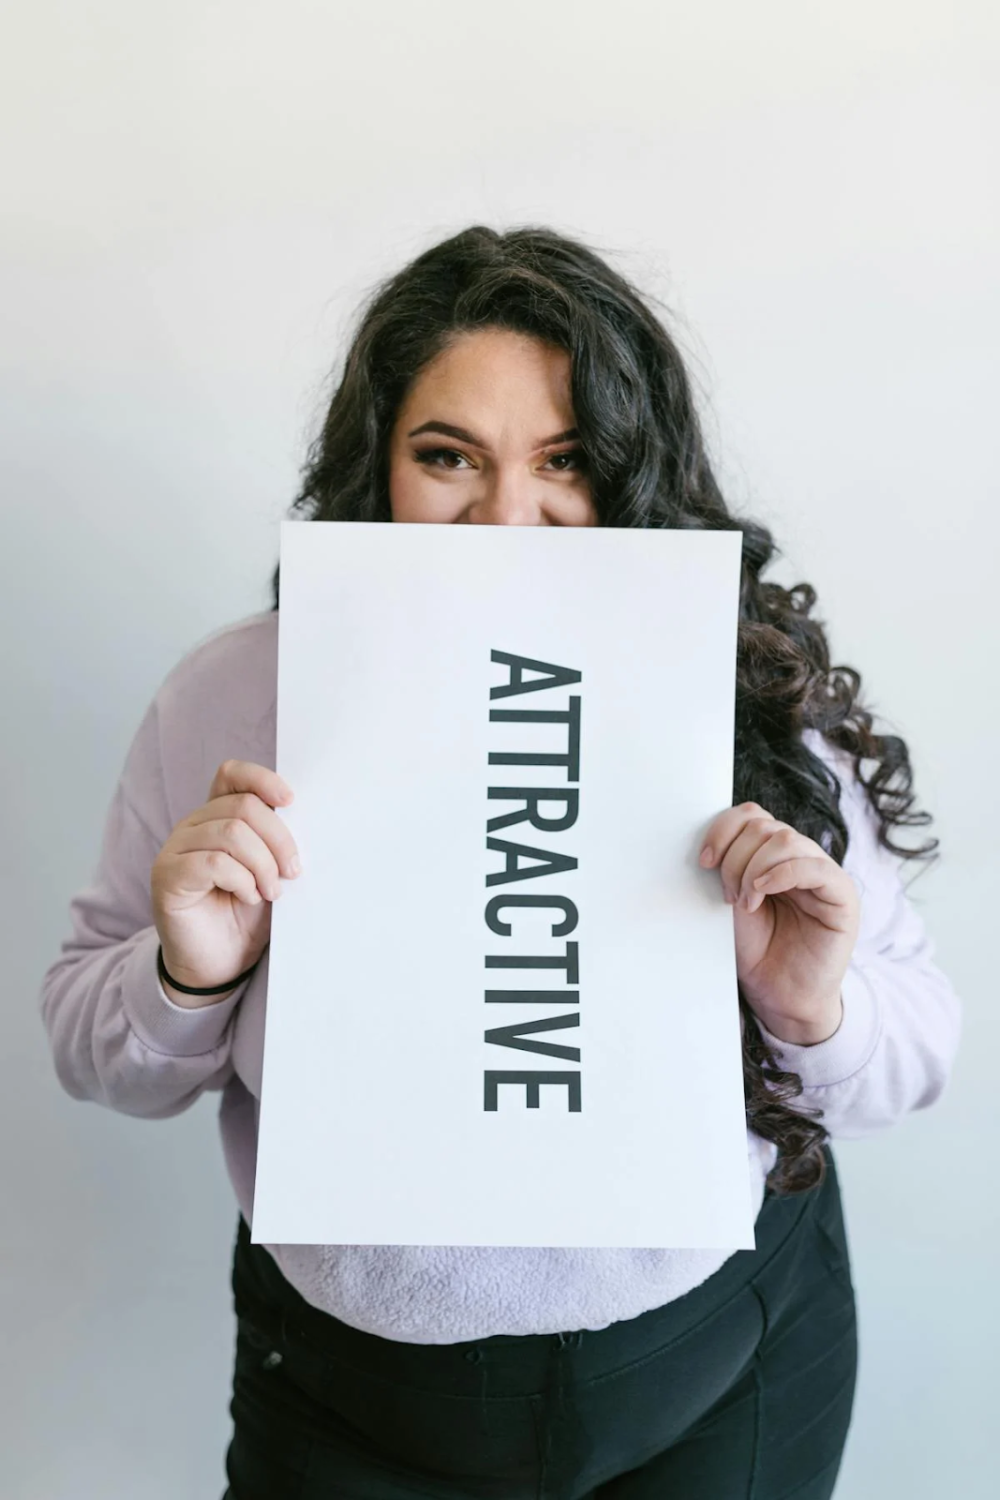 a woman holding a placard stating "attractive"